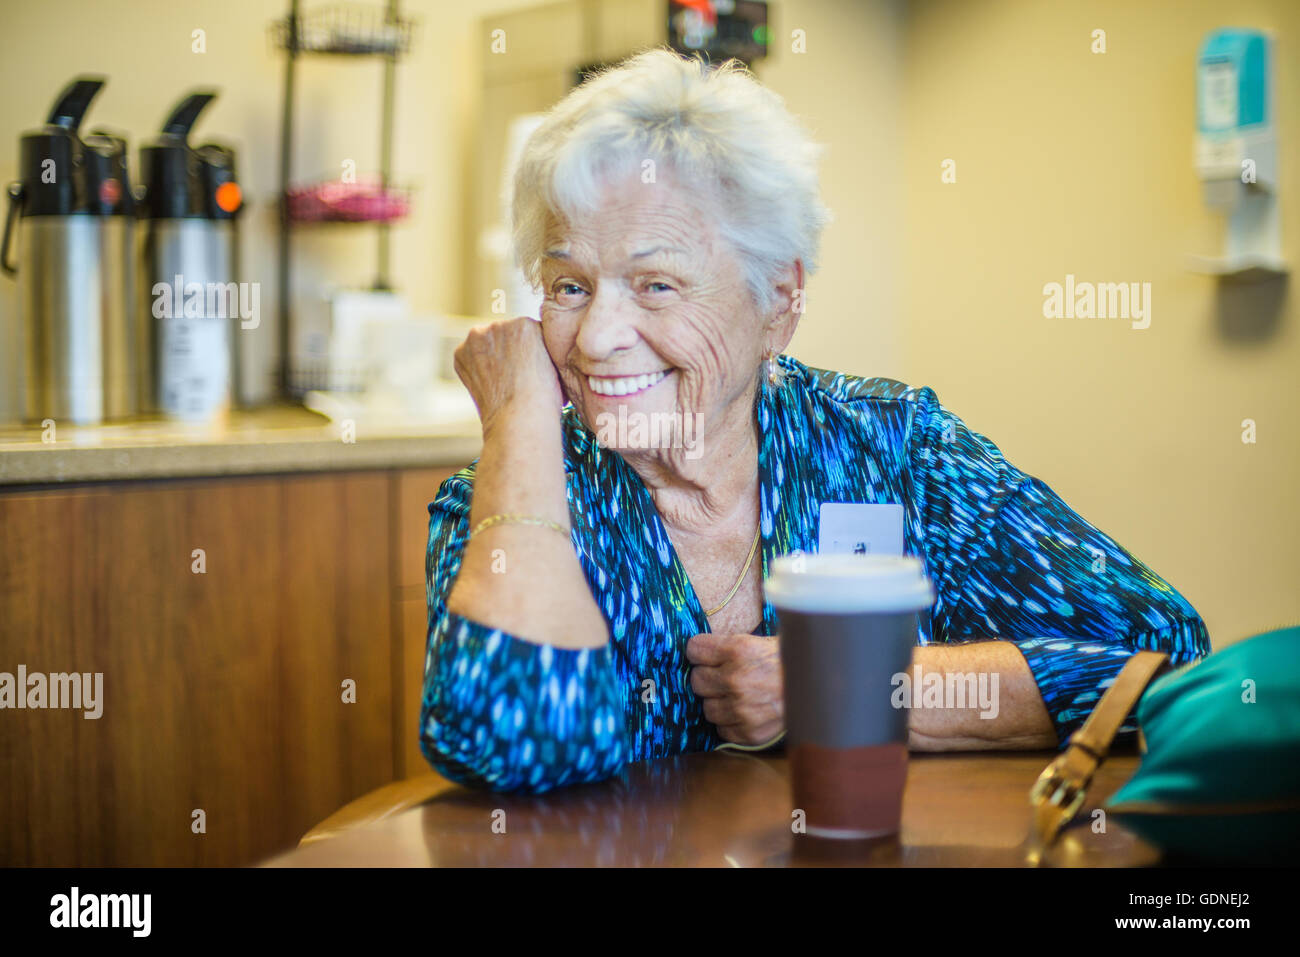 Grey haired woman at table smiling at camera Banque D'Images